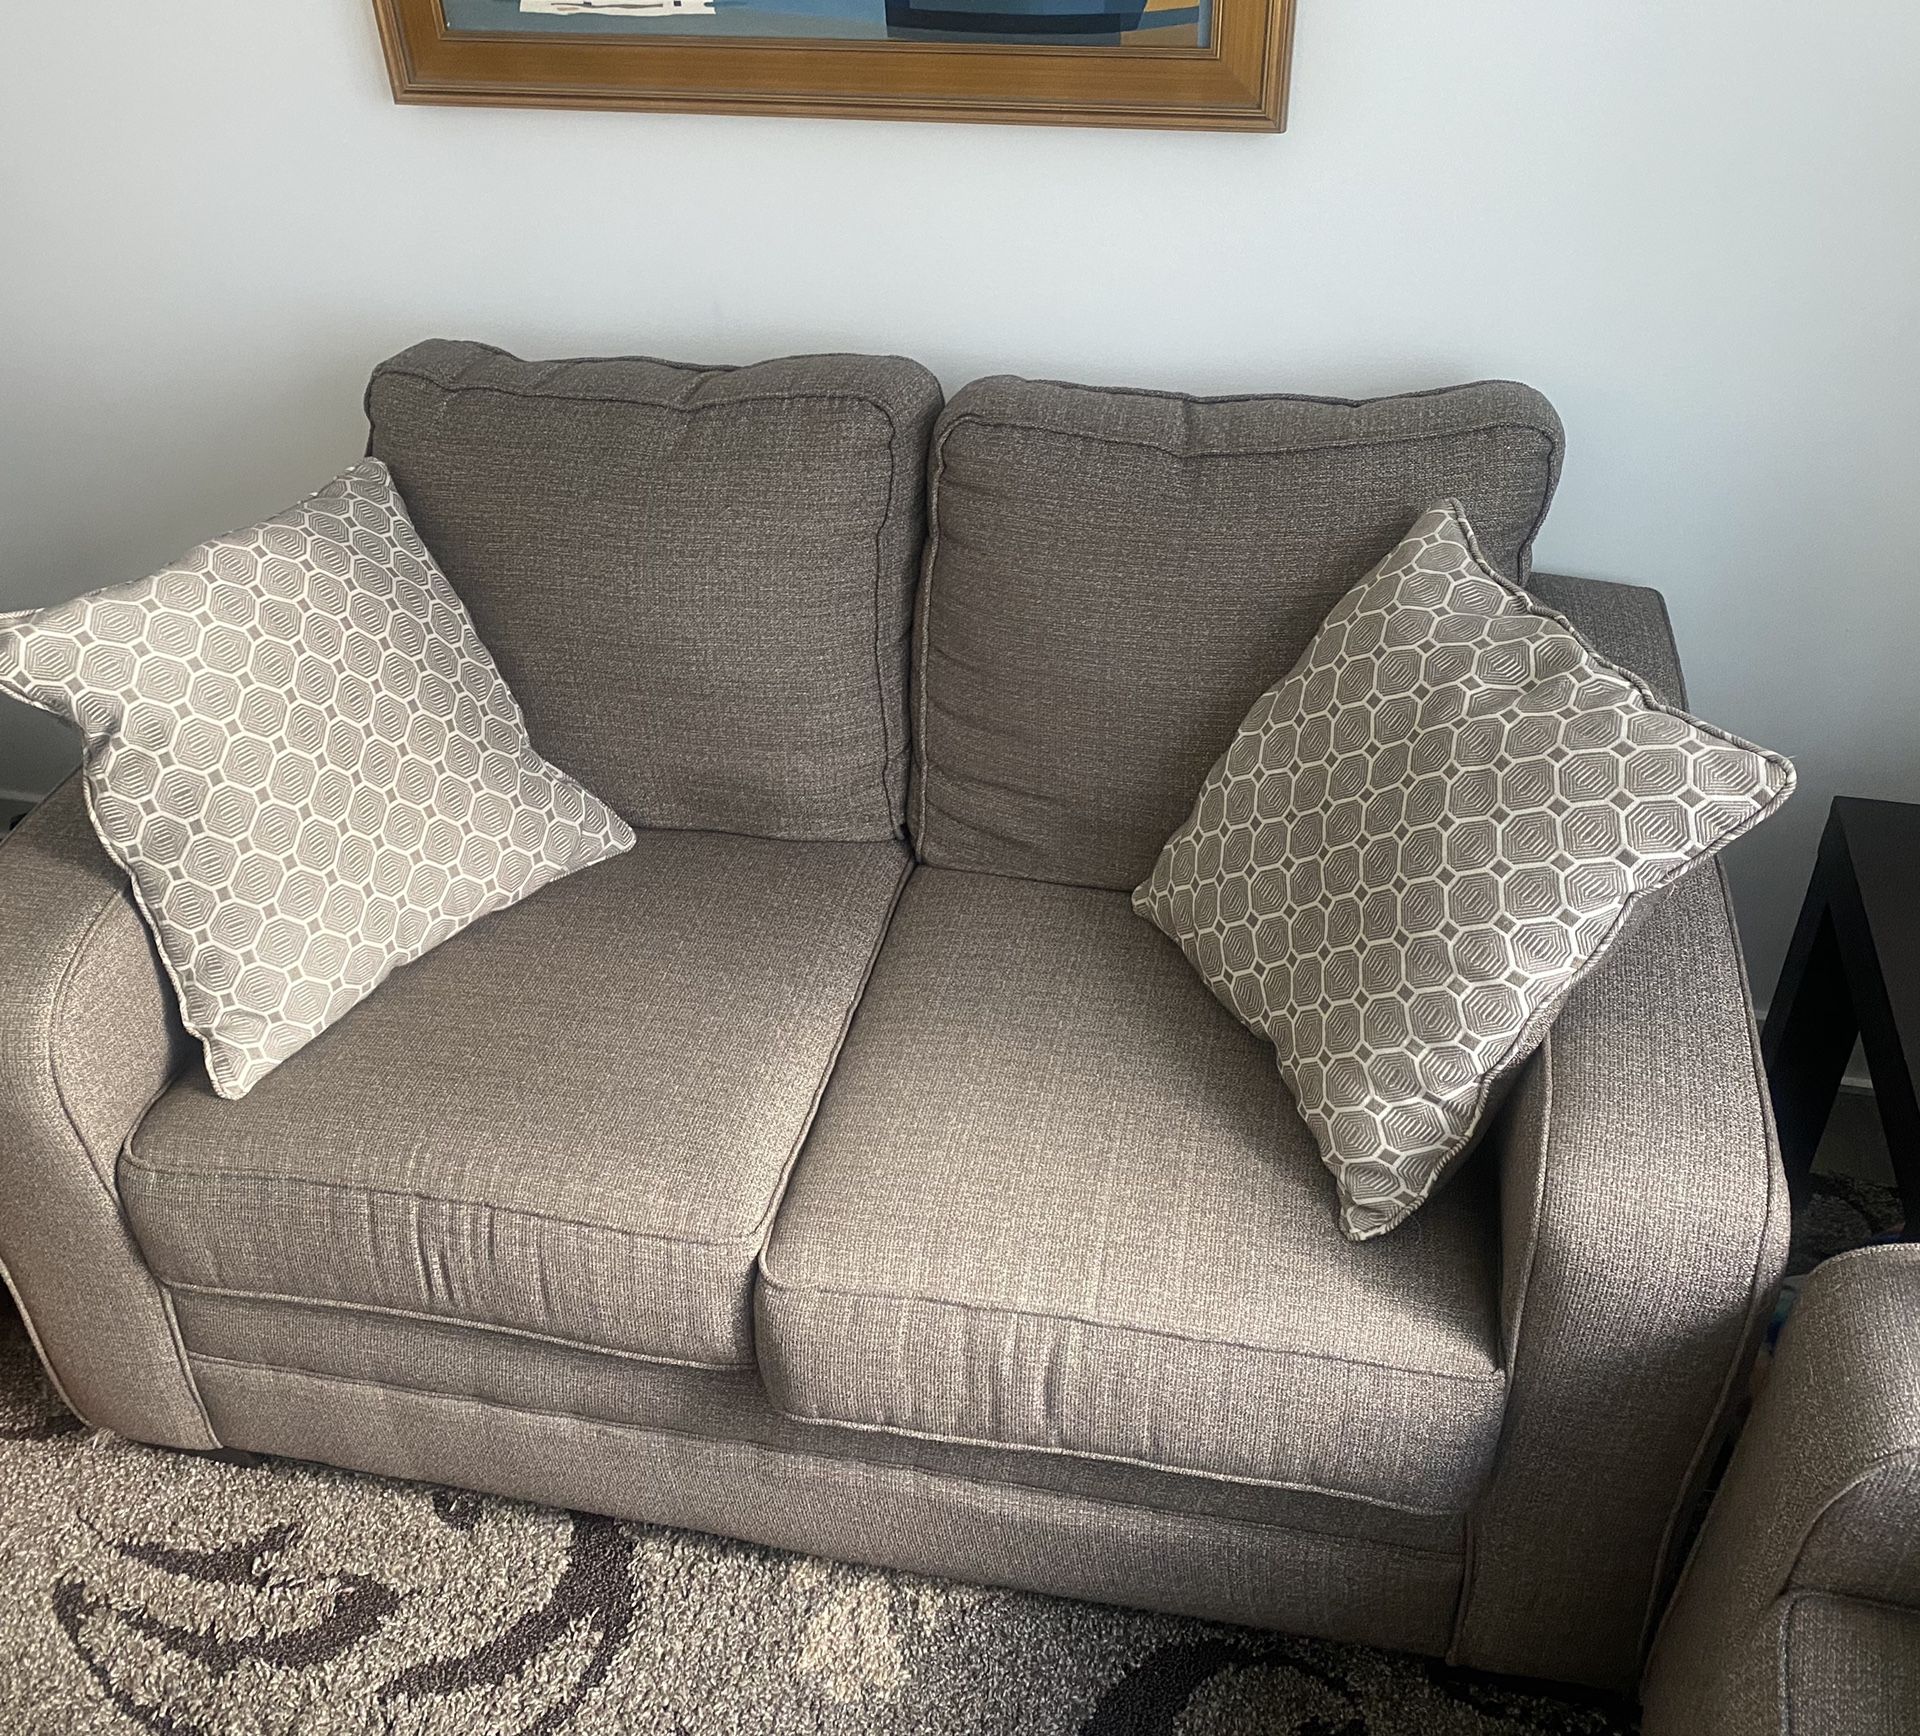 Small couch/love seat